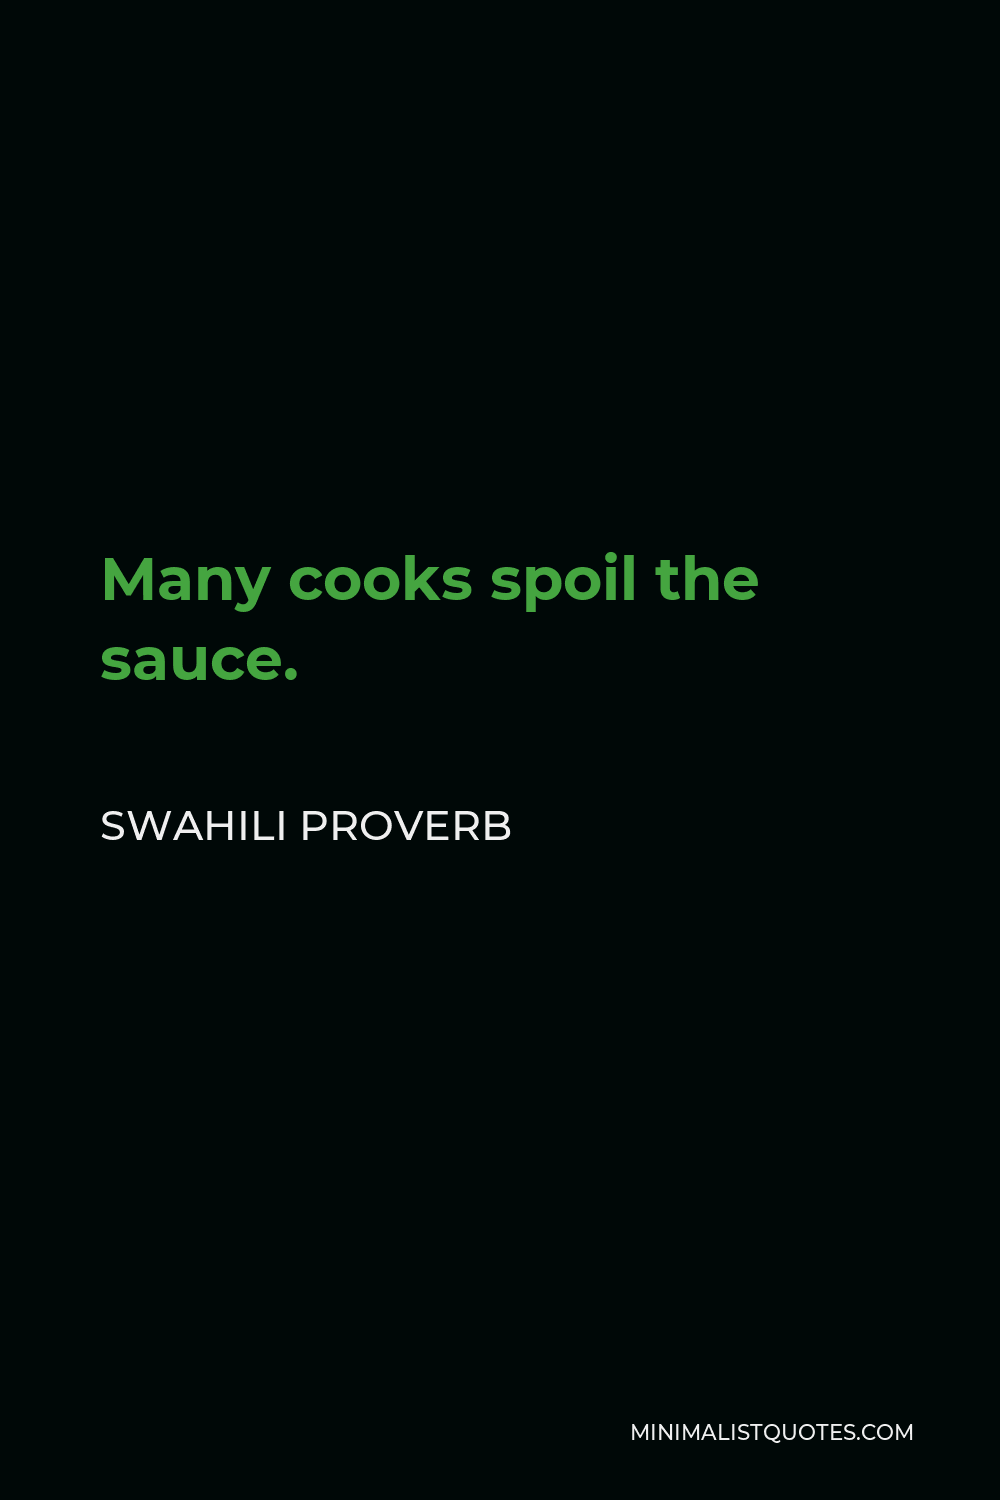 Swahili Proverb Quote - Many cooks spoil the sauce.